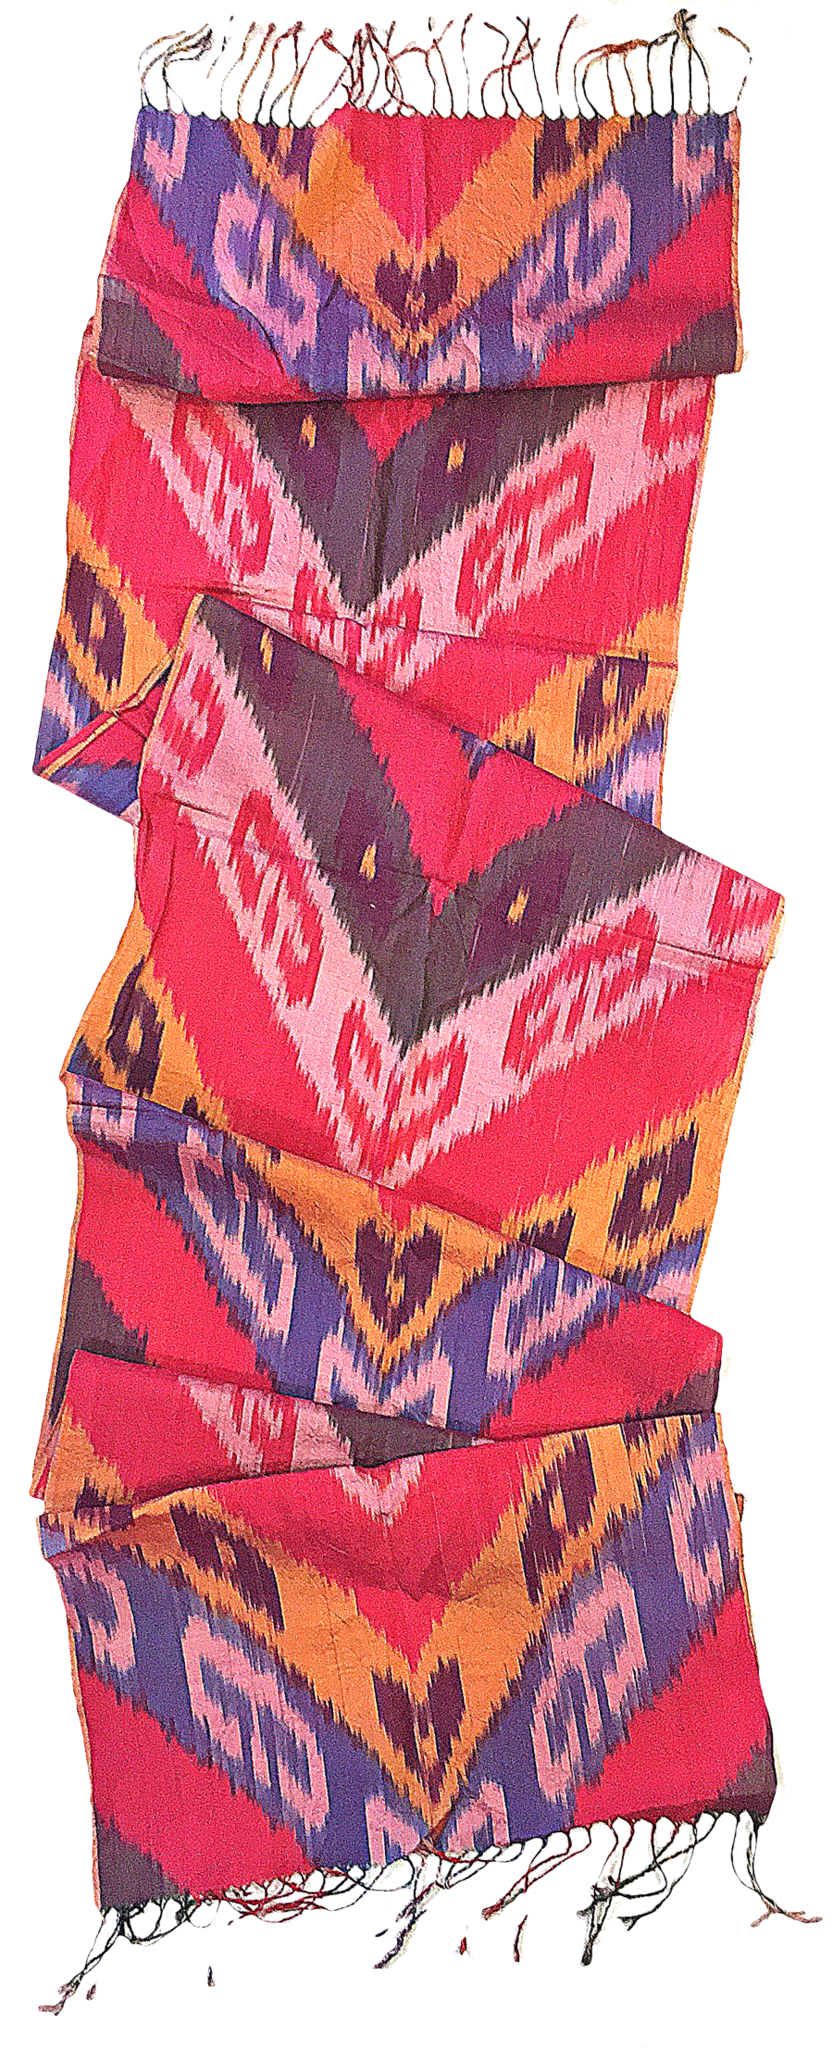 Handy-dyed, handwoven, silk and cotton authentic Ikat scarf by Master Weaver Rasuljon Mirzaahmedov 